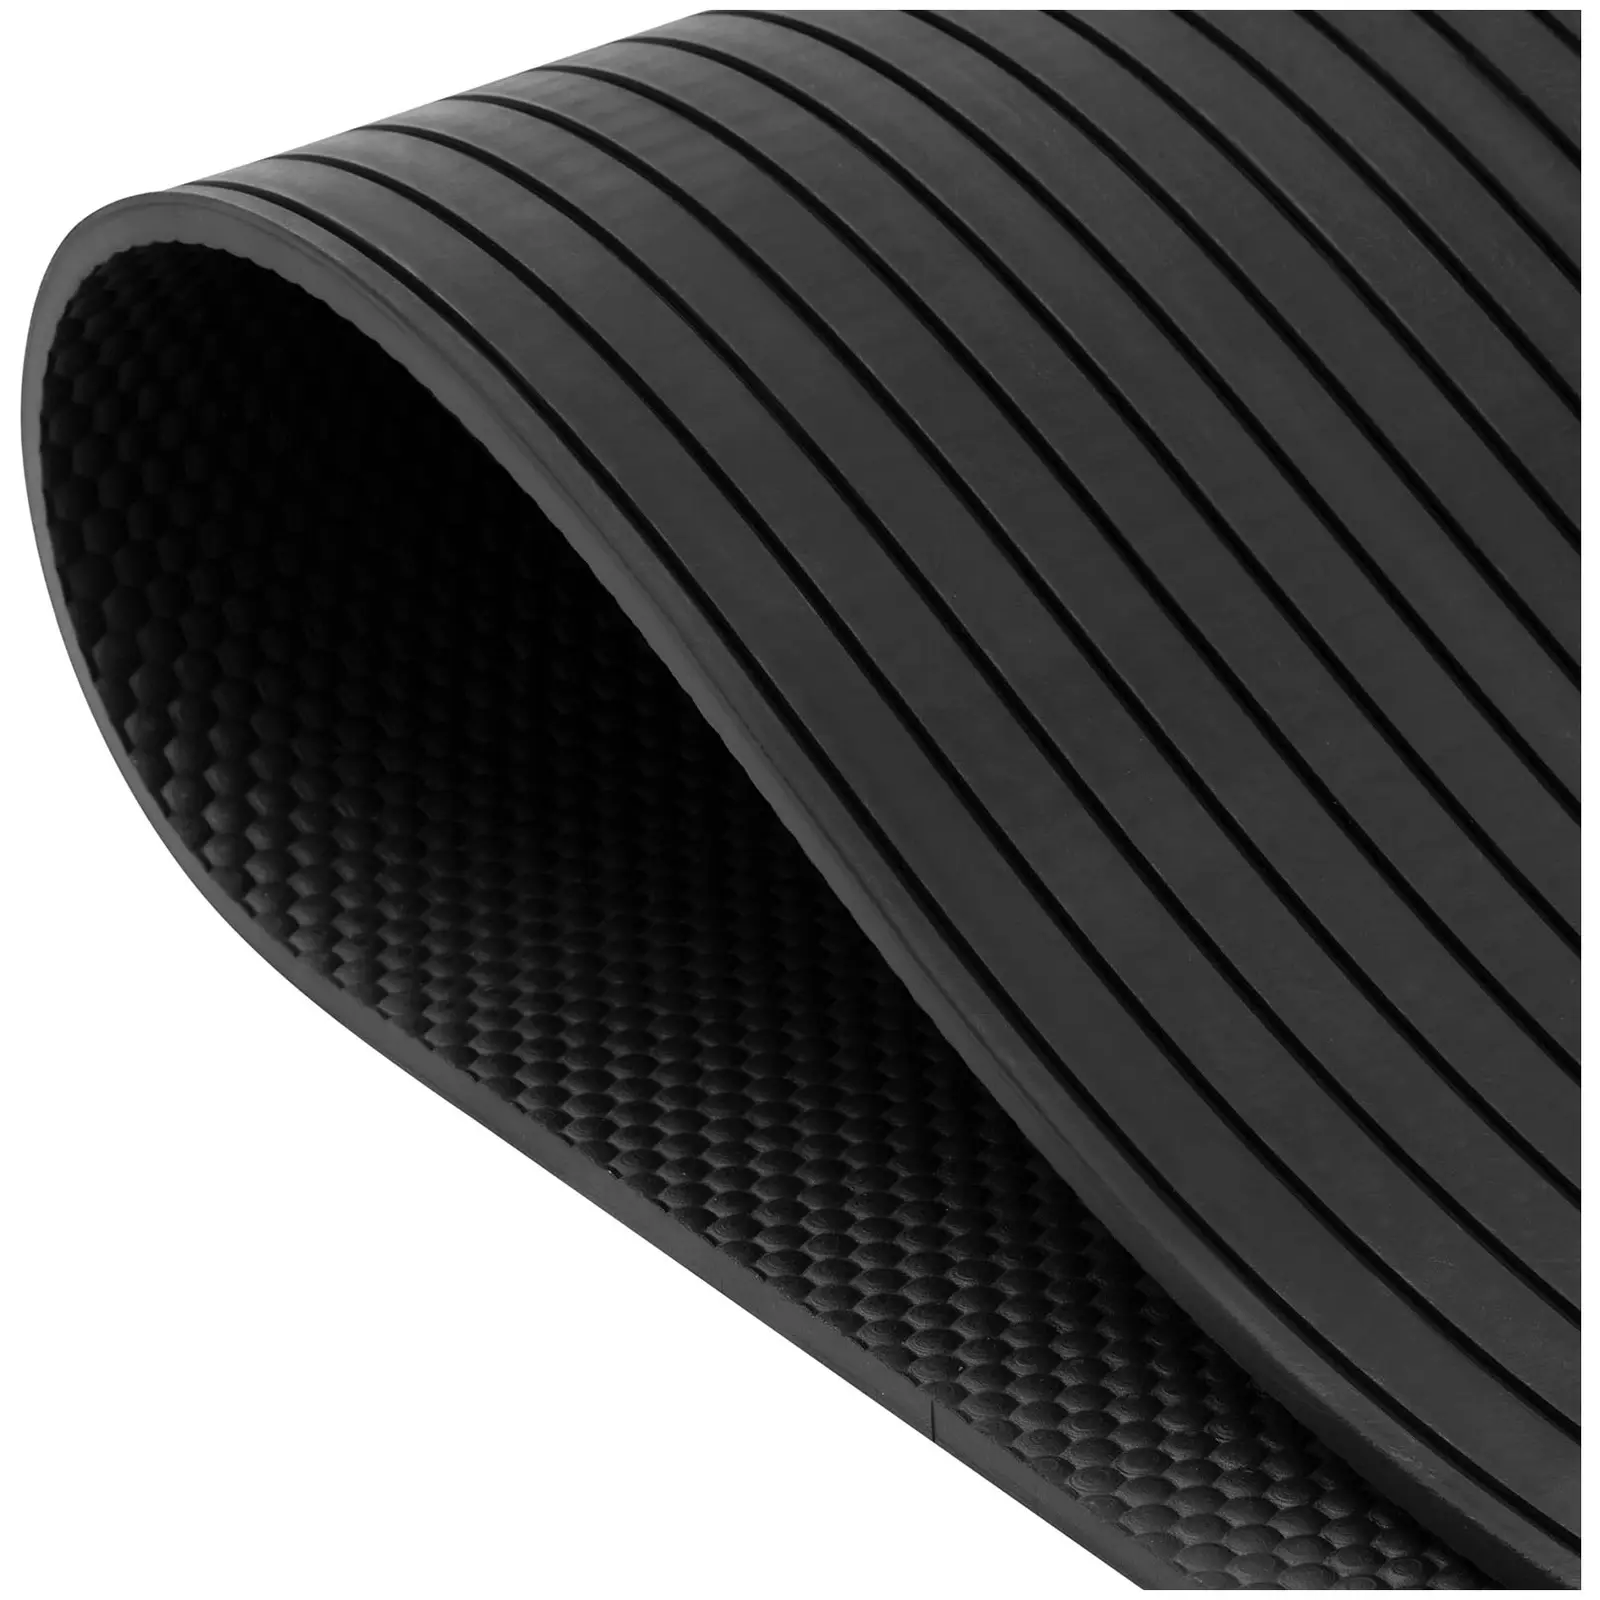 Stable Mats - set of 30 - with drainage grooves - NR, recycled rubber